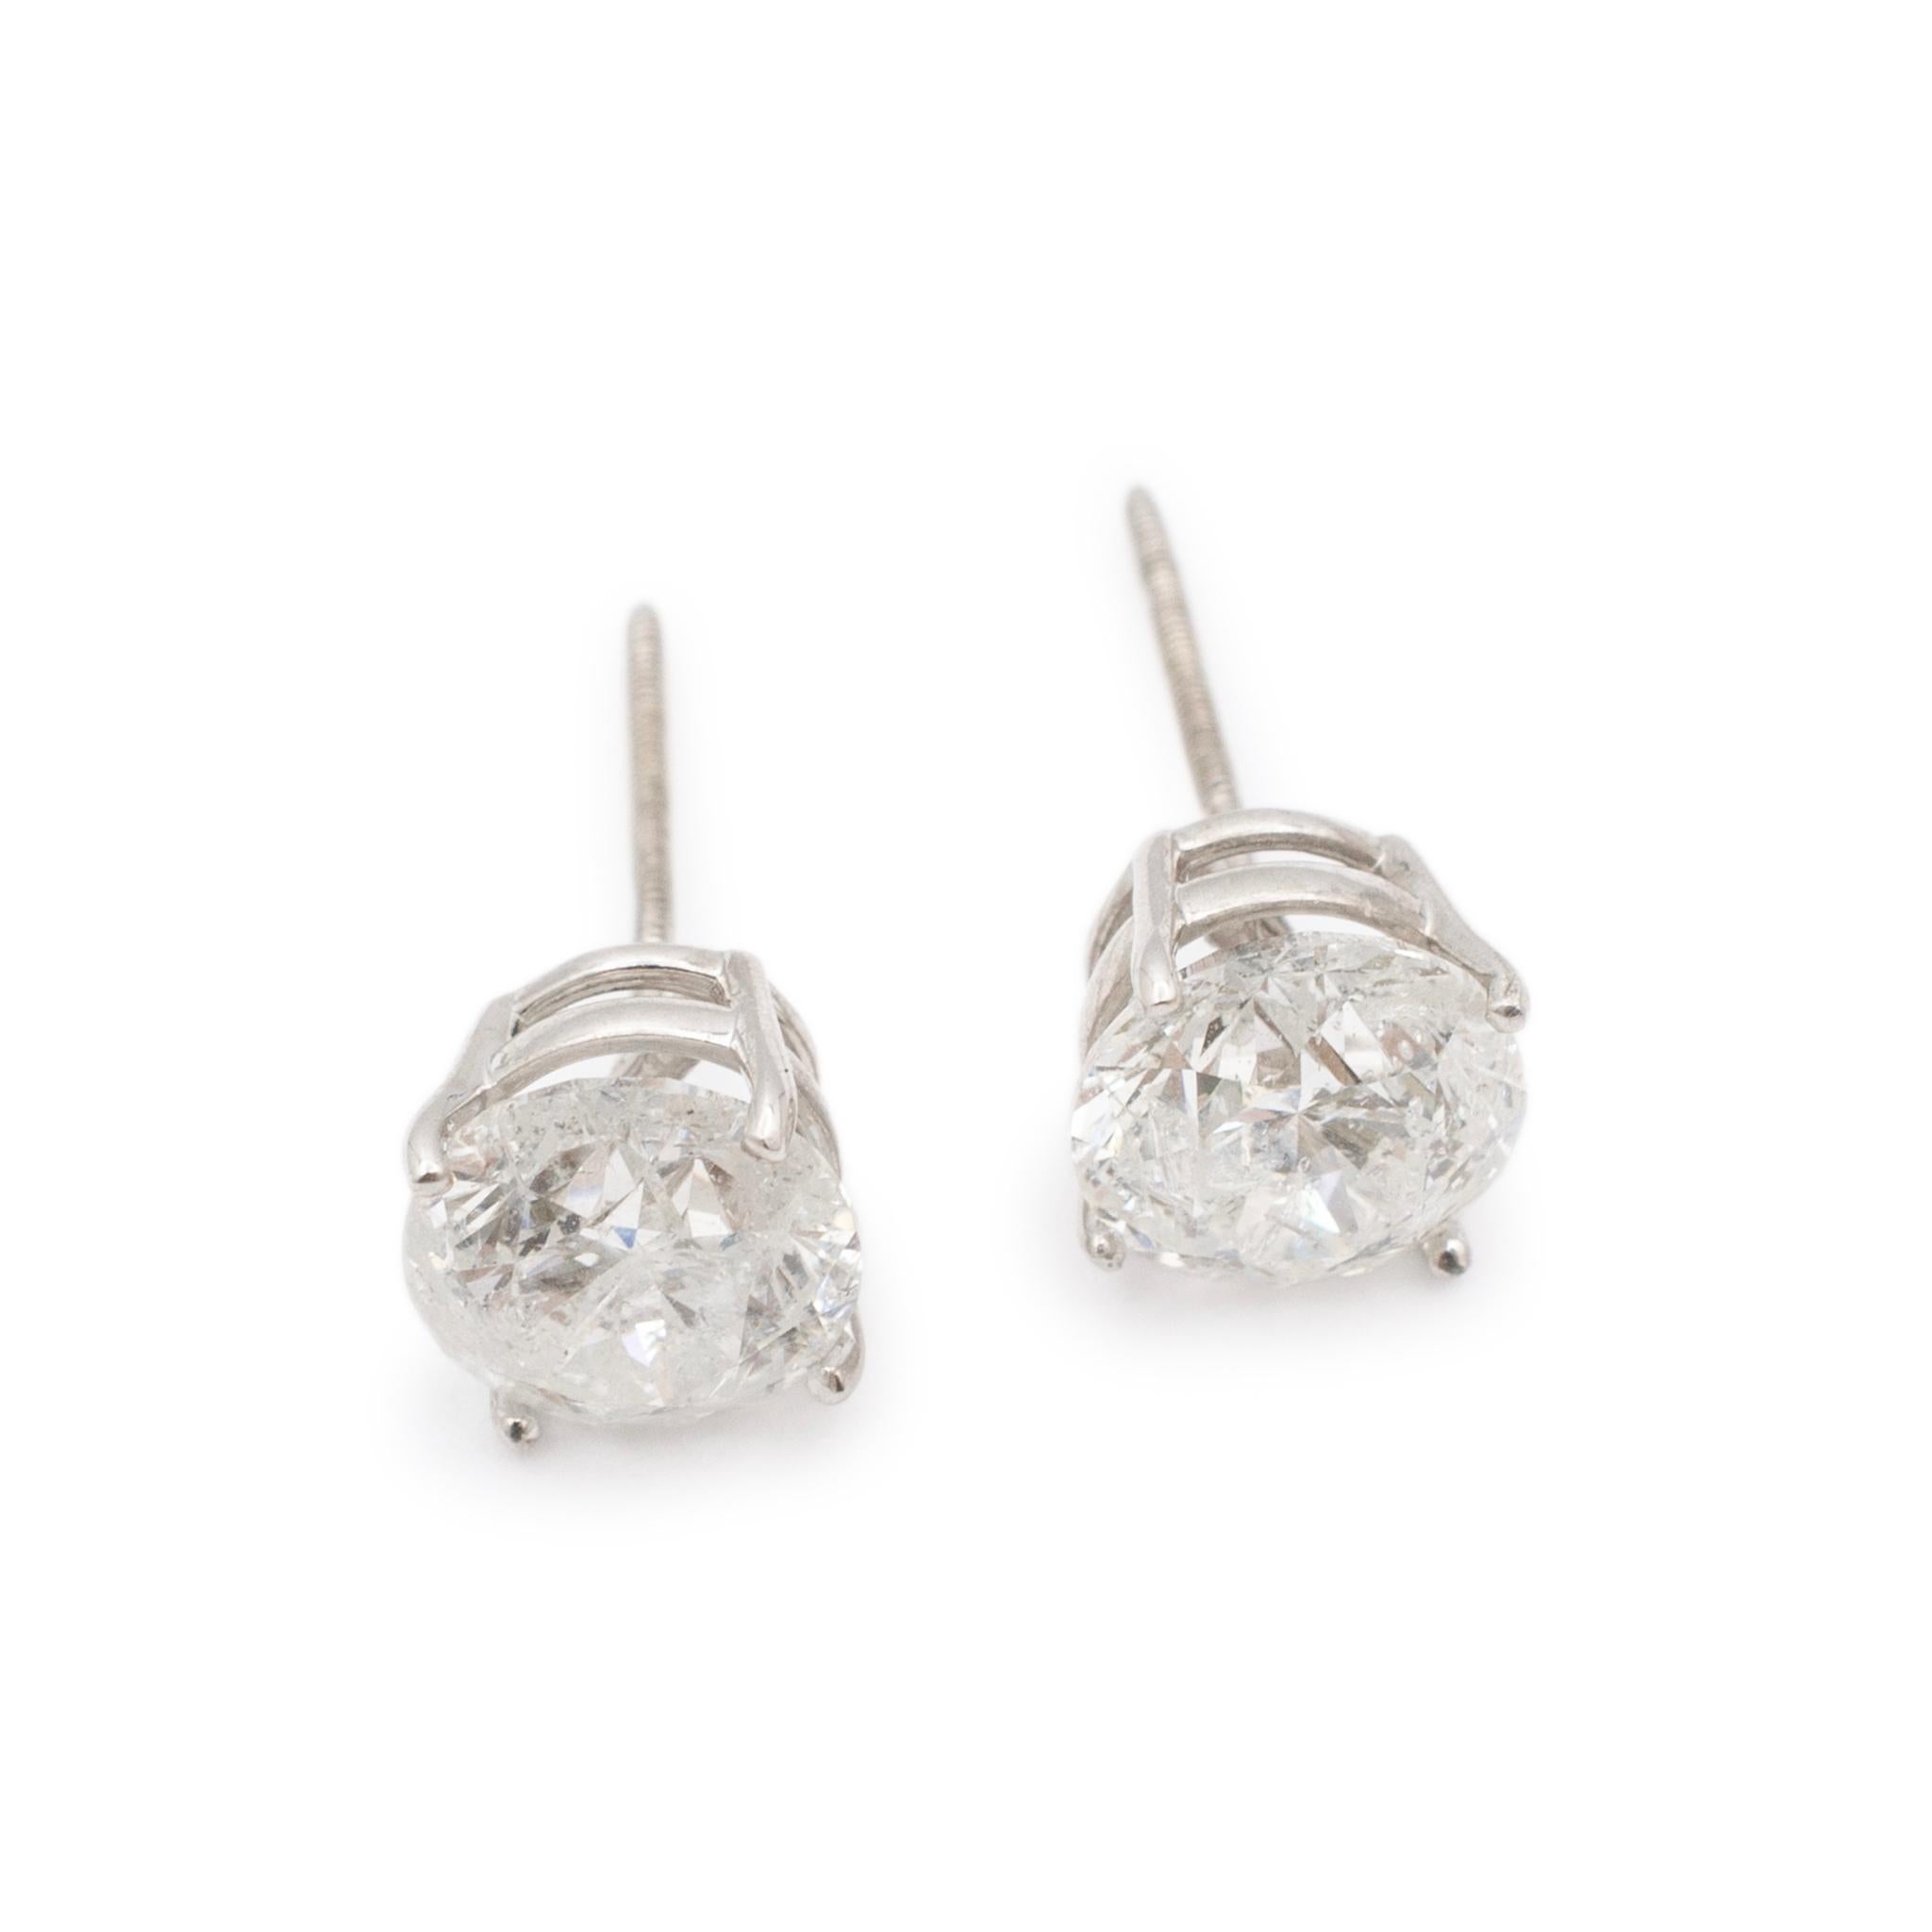 Gender: Ladies

Metal Type: 14K White Gold

Length: 0.25 inches

Diameter: 7.50 mm

Weight: 1.82 grams

14K white gold, diamond stud earrings with screw backs Engraved with 